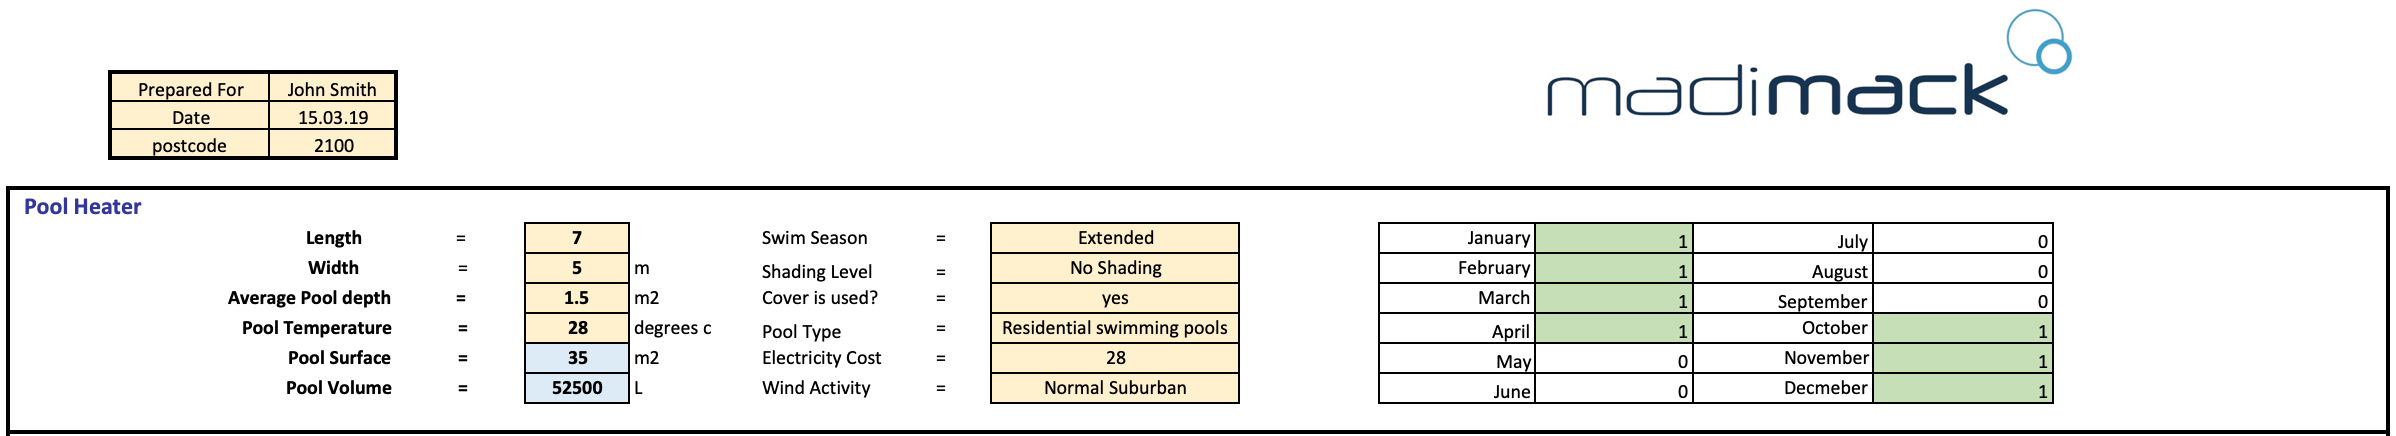 Primary Data for Pool Heat Pump